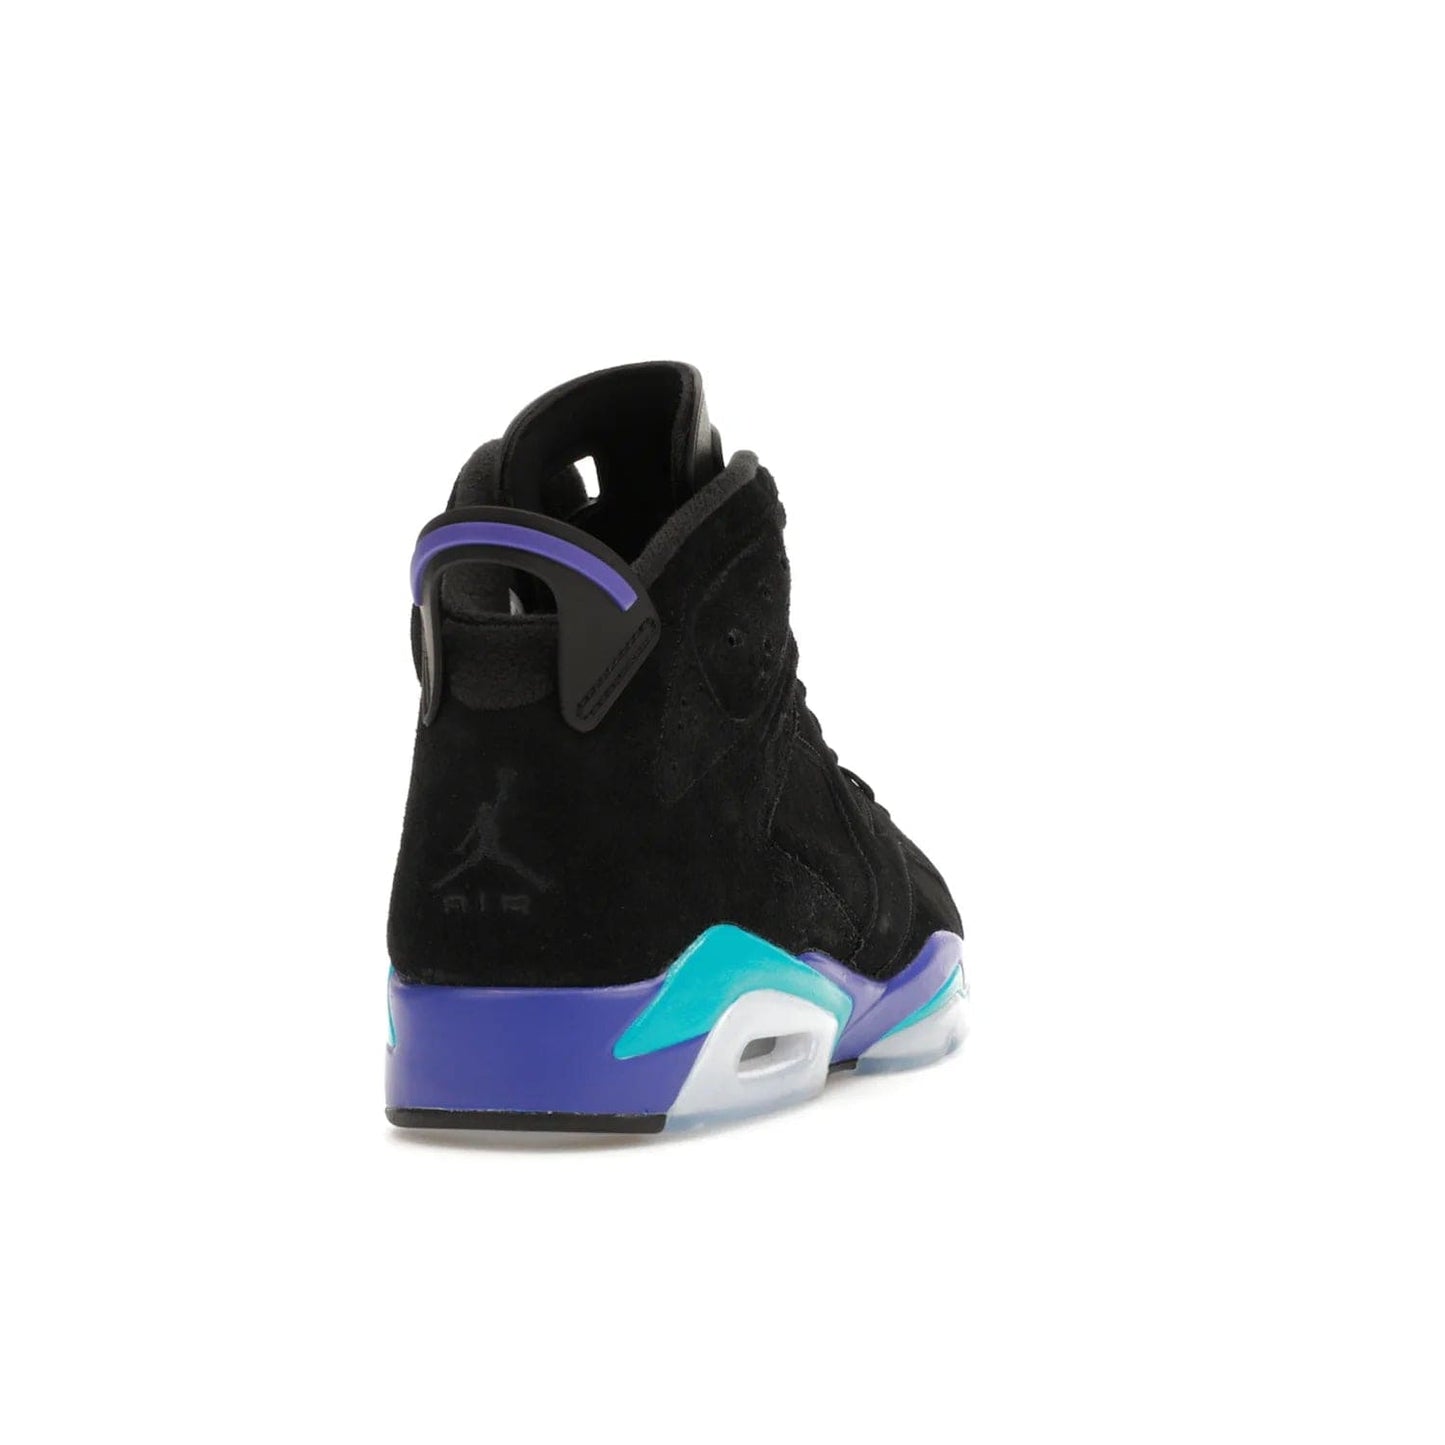 Jordan 6 Retro Aqua - Image 30 - Only at www.BallersClubKickz.com - Feel the classic Jordan 6 Retro Aqua paired with modern style. Black, Bright Concord, and Aquatone hues are crafted with a supple suede and rubberized heel tab. This standout sneaker adds signature Jordan elements at $200. Elevate your style with the Jordan 6 Retro Aqua.